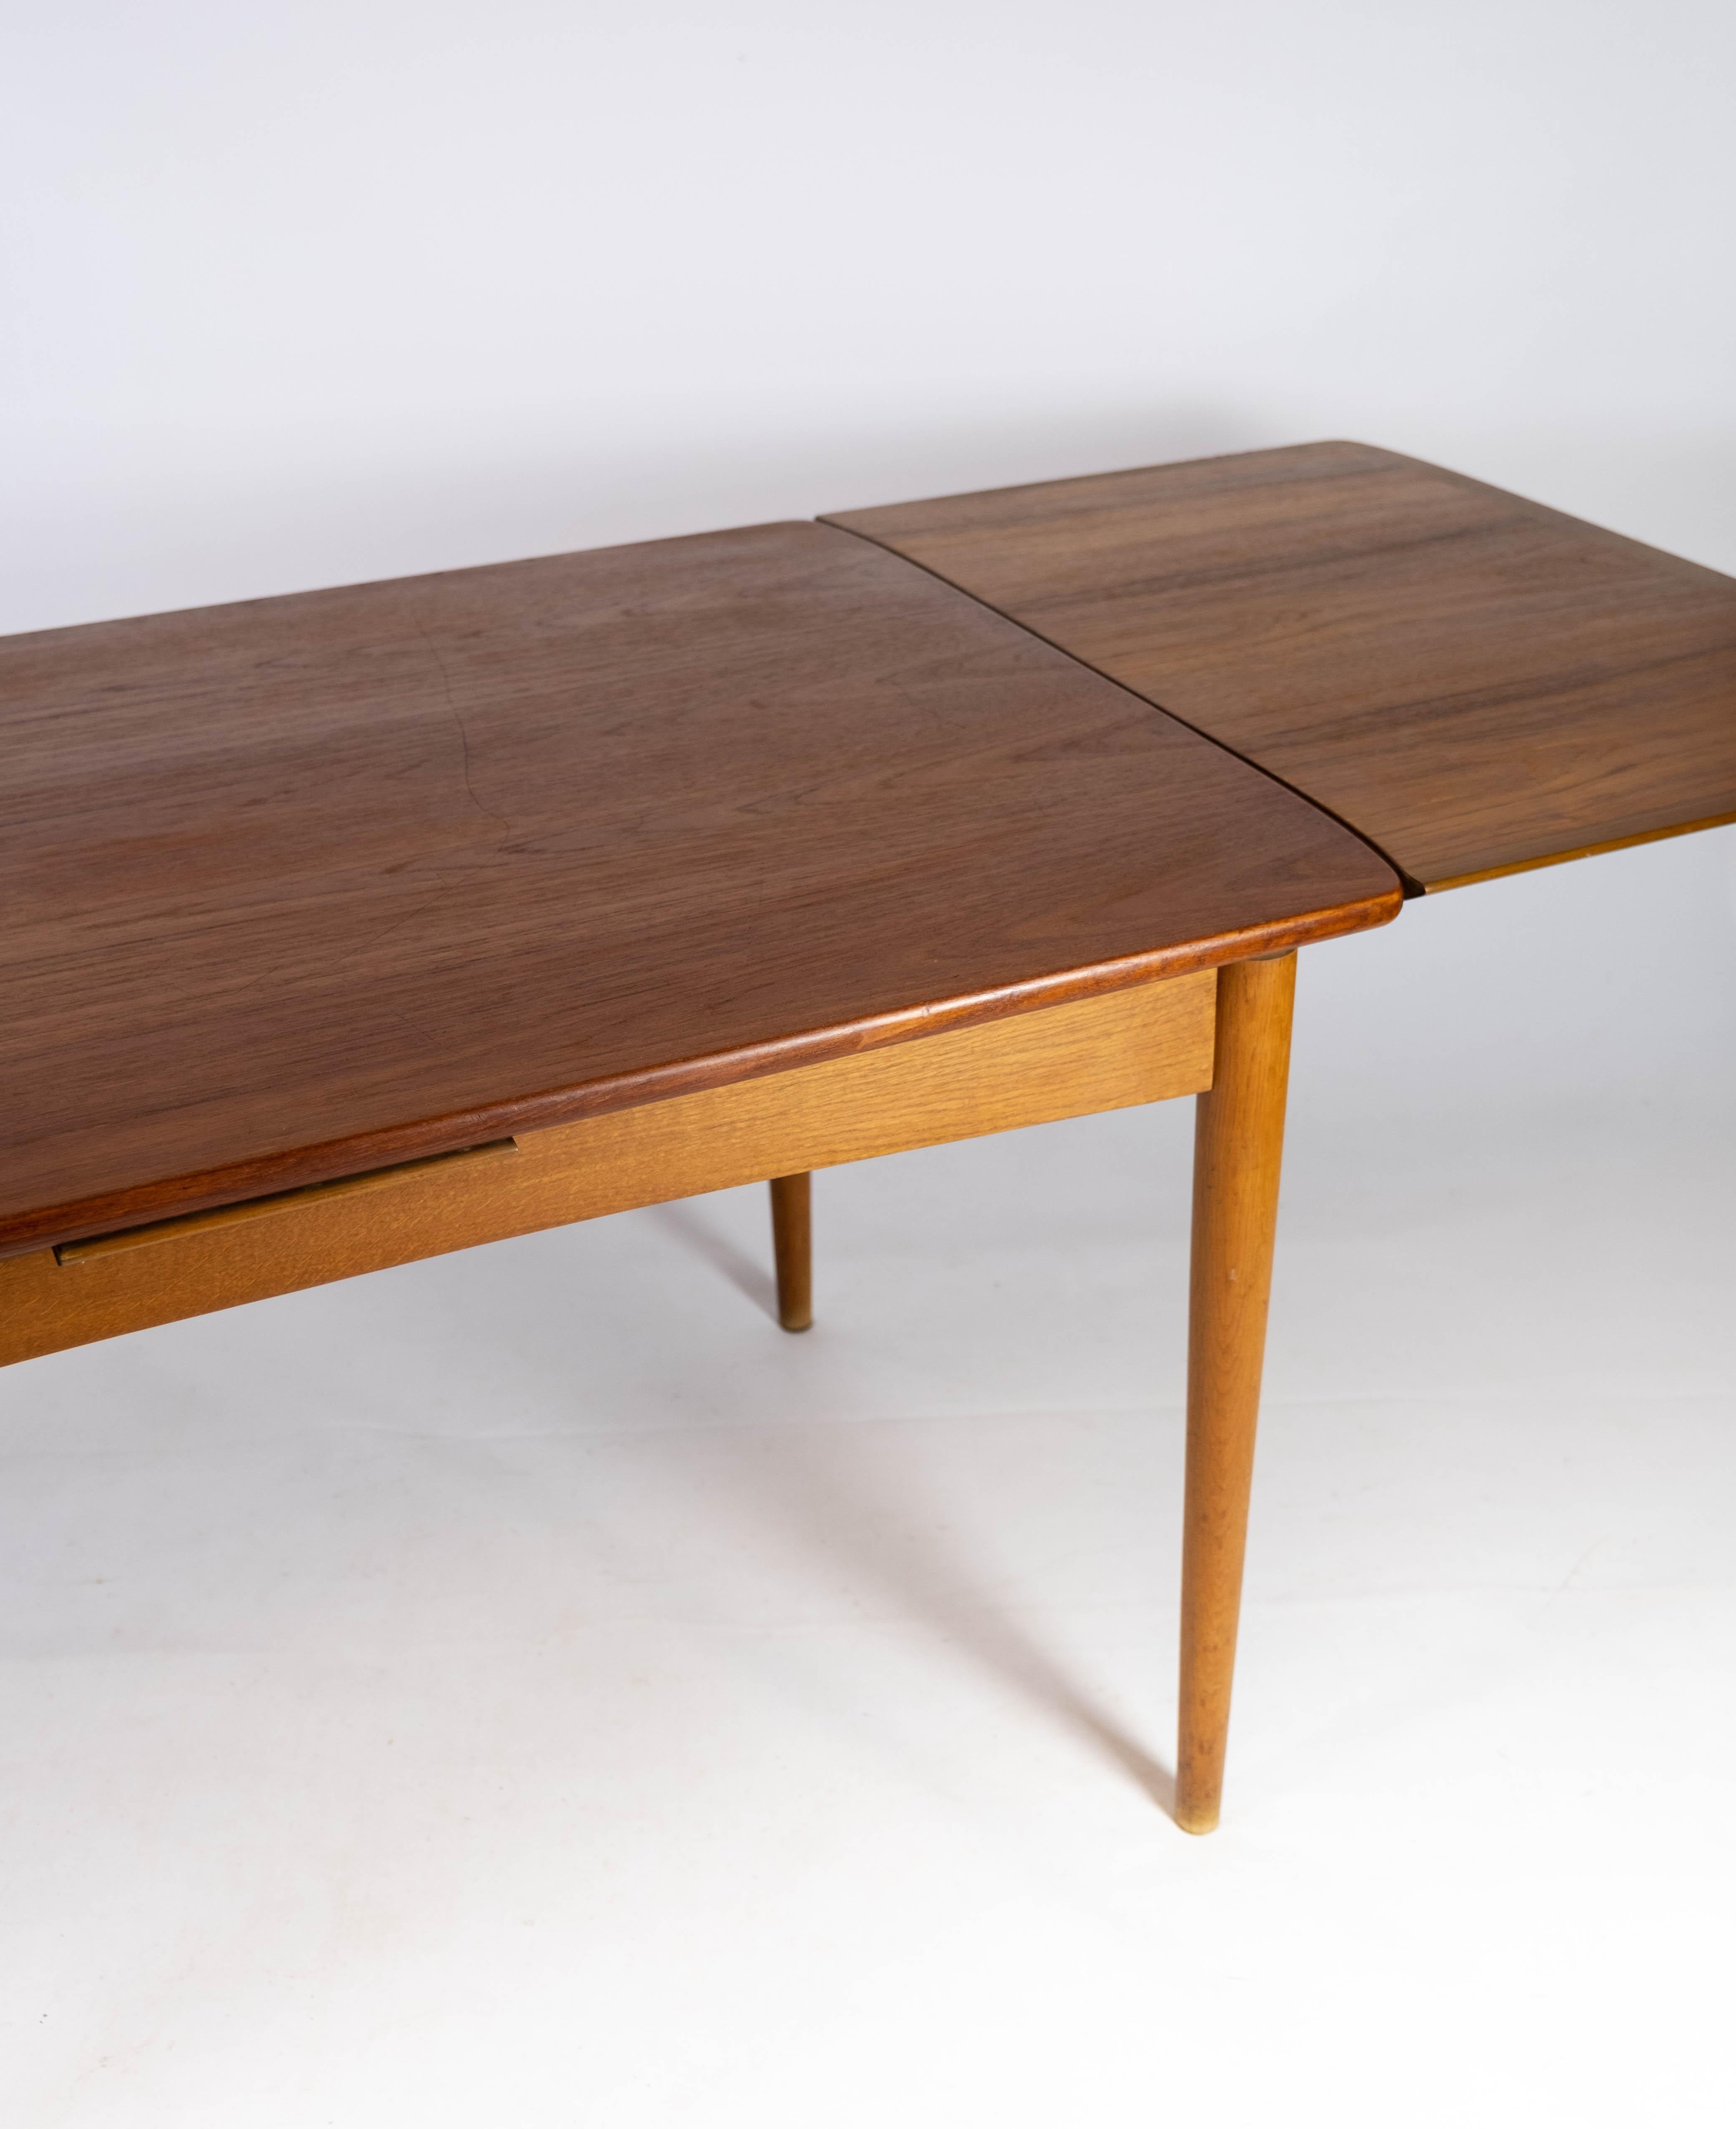 Dining Table in Teak with Extentions and Legs in Oak, of Danish Design, 1960s 5